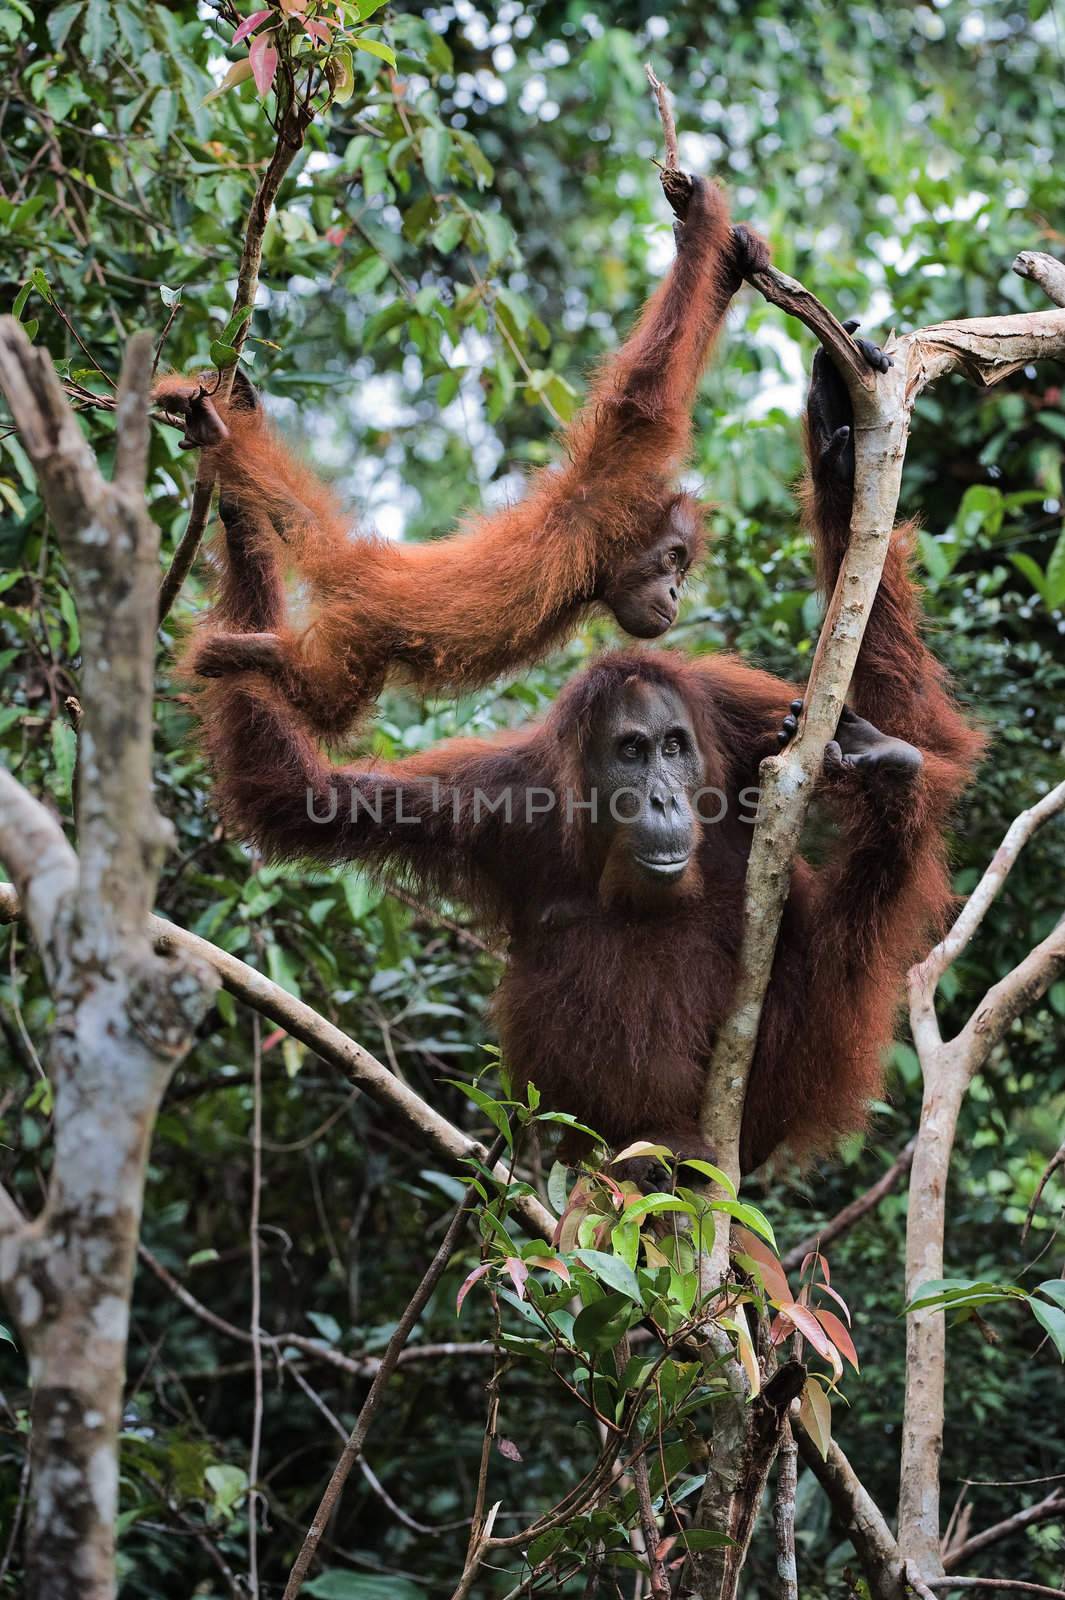 Female the orangutan with a cub in branches of trees. by SURZ